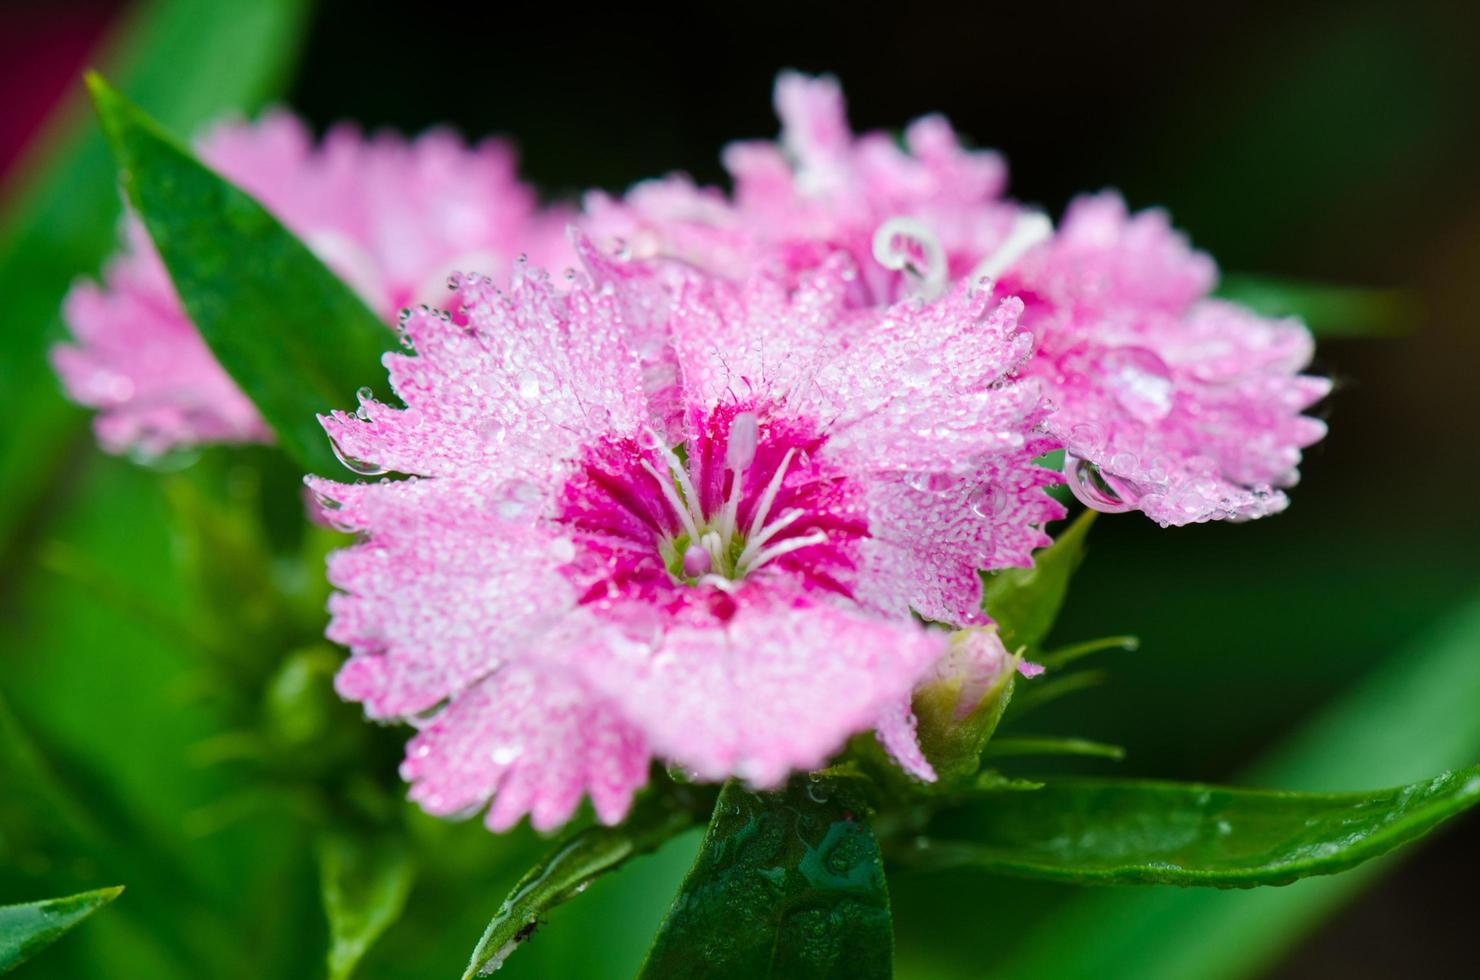 Pink Dianthus flowers filled with dew drops photo